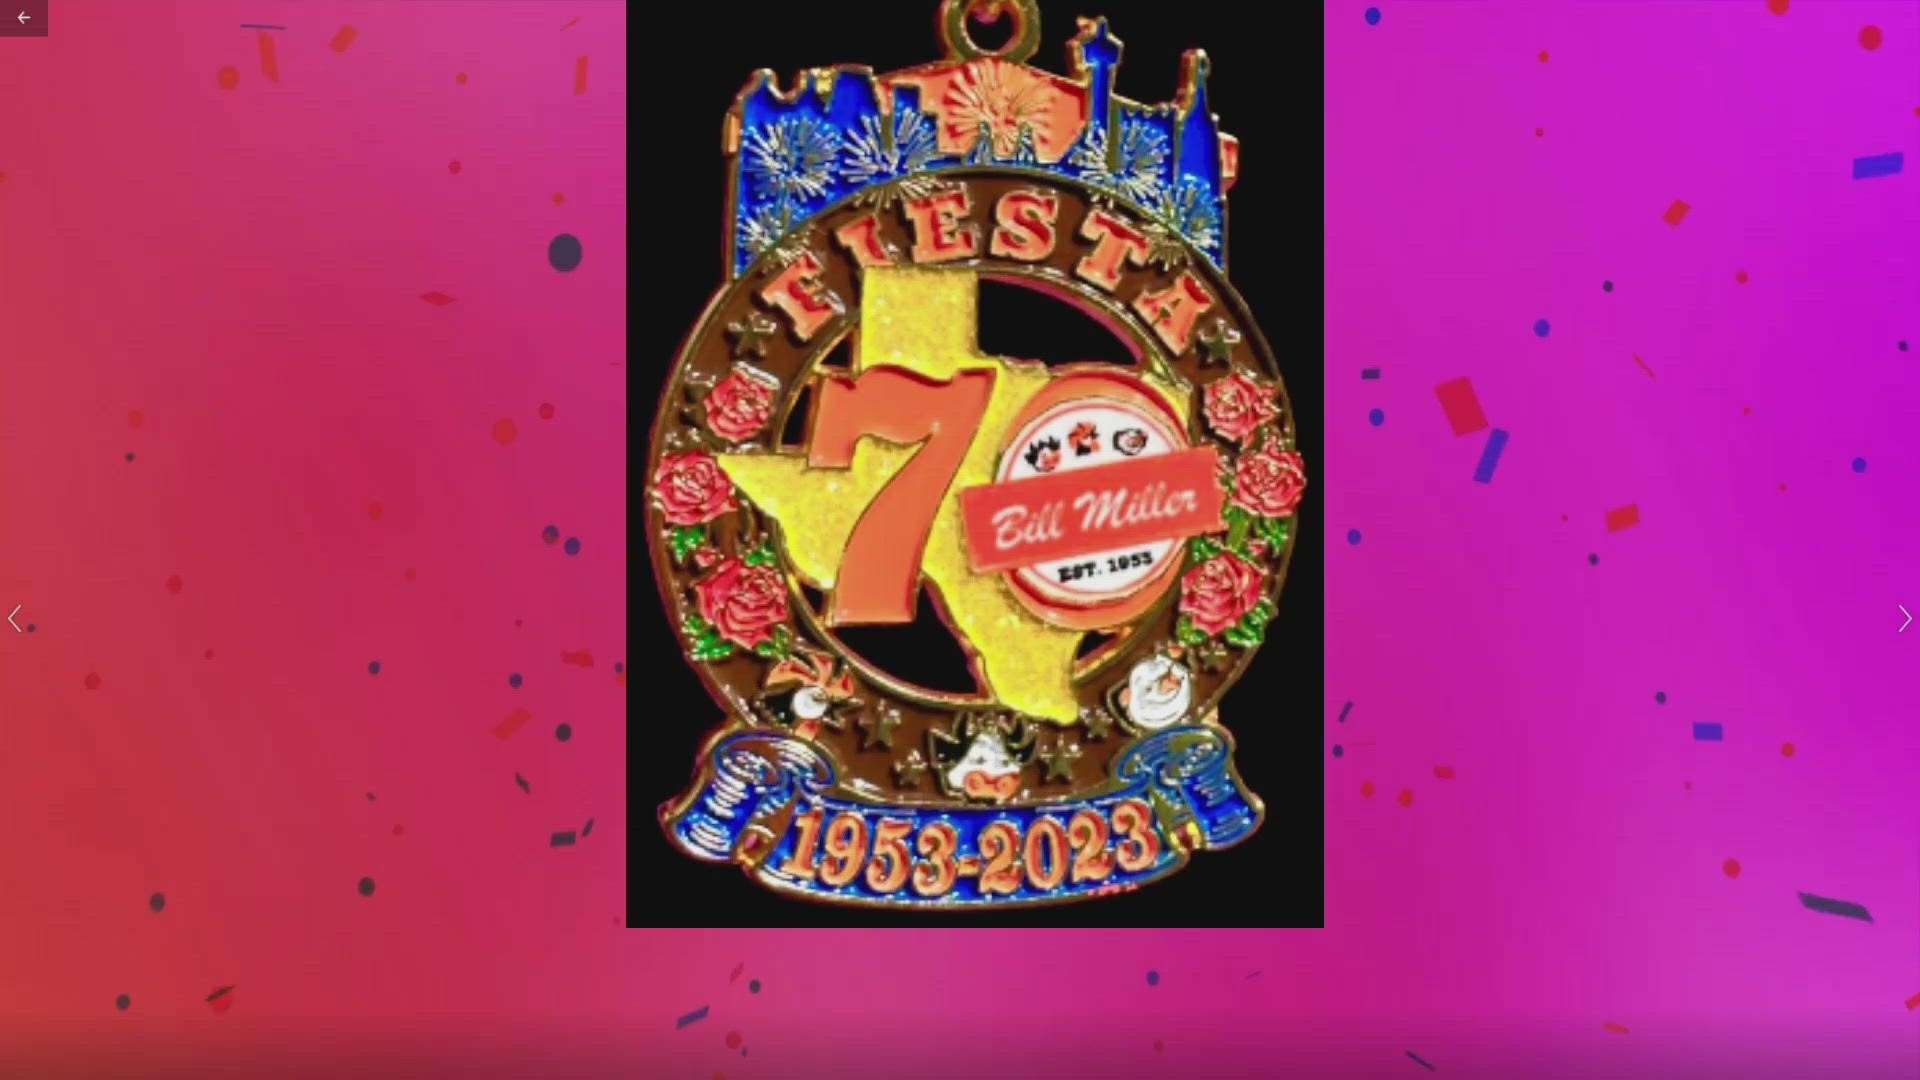 To commemorate the anniversary, they released a new Texas Tea Bucket with a 70th anniversary logo at all locations, plus a Fiesta medal.